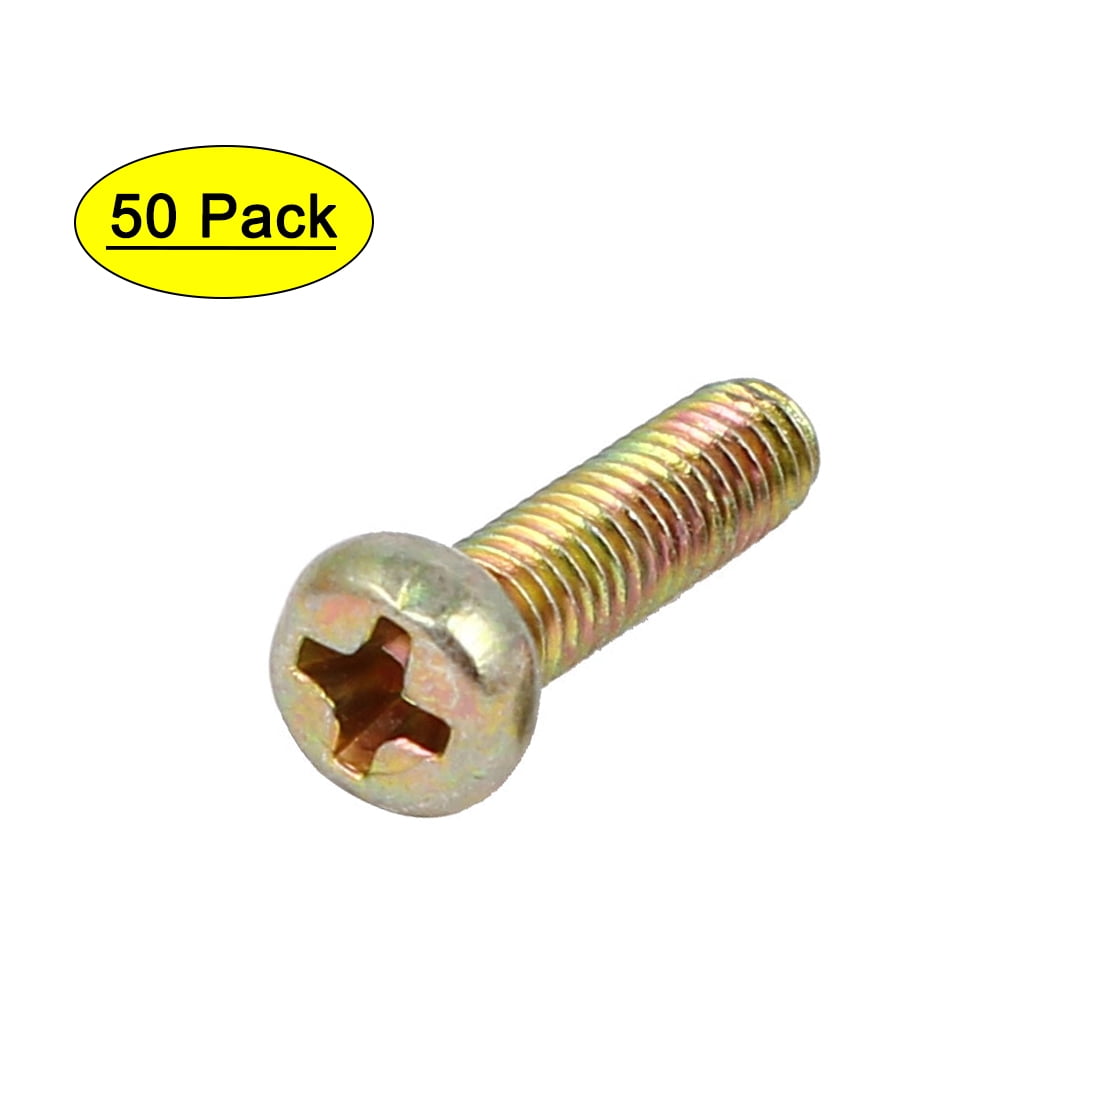 pack of 50 Machine screws with nuts M4 x 40 cheese head slot bolt bolts screw 